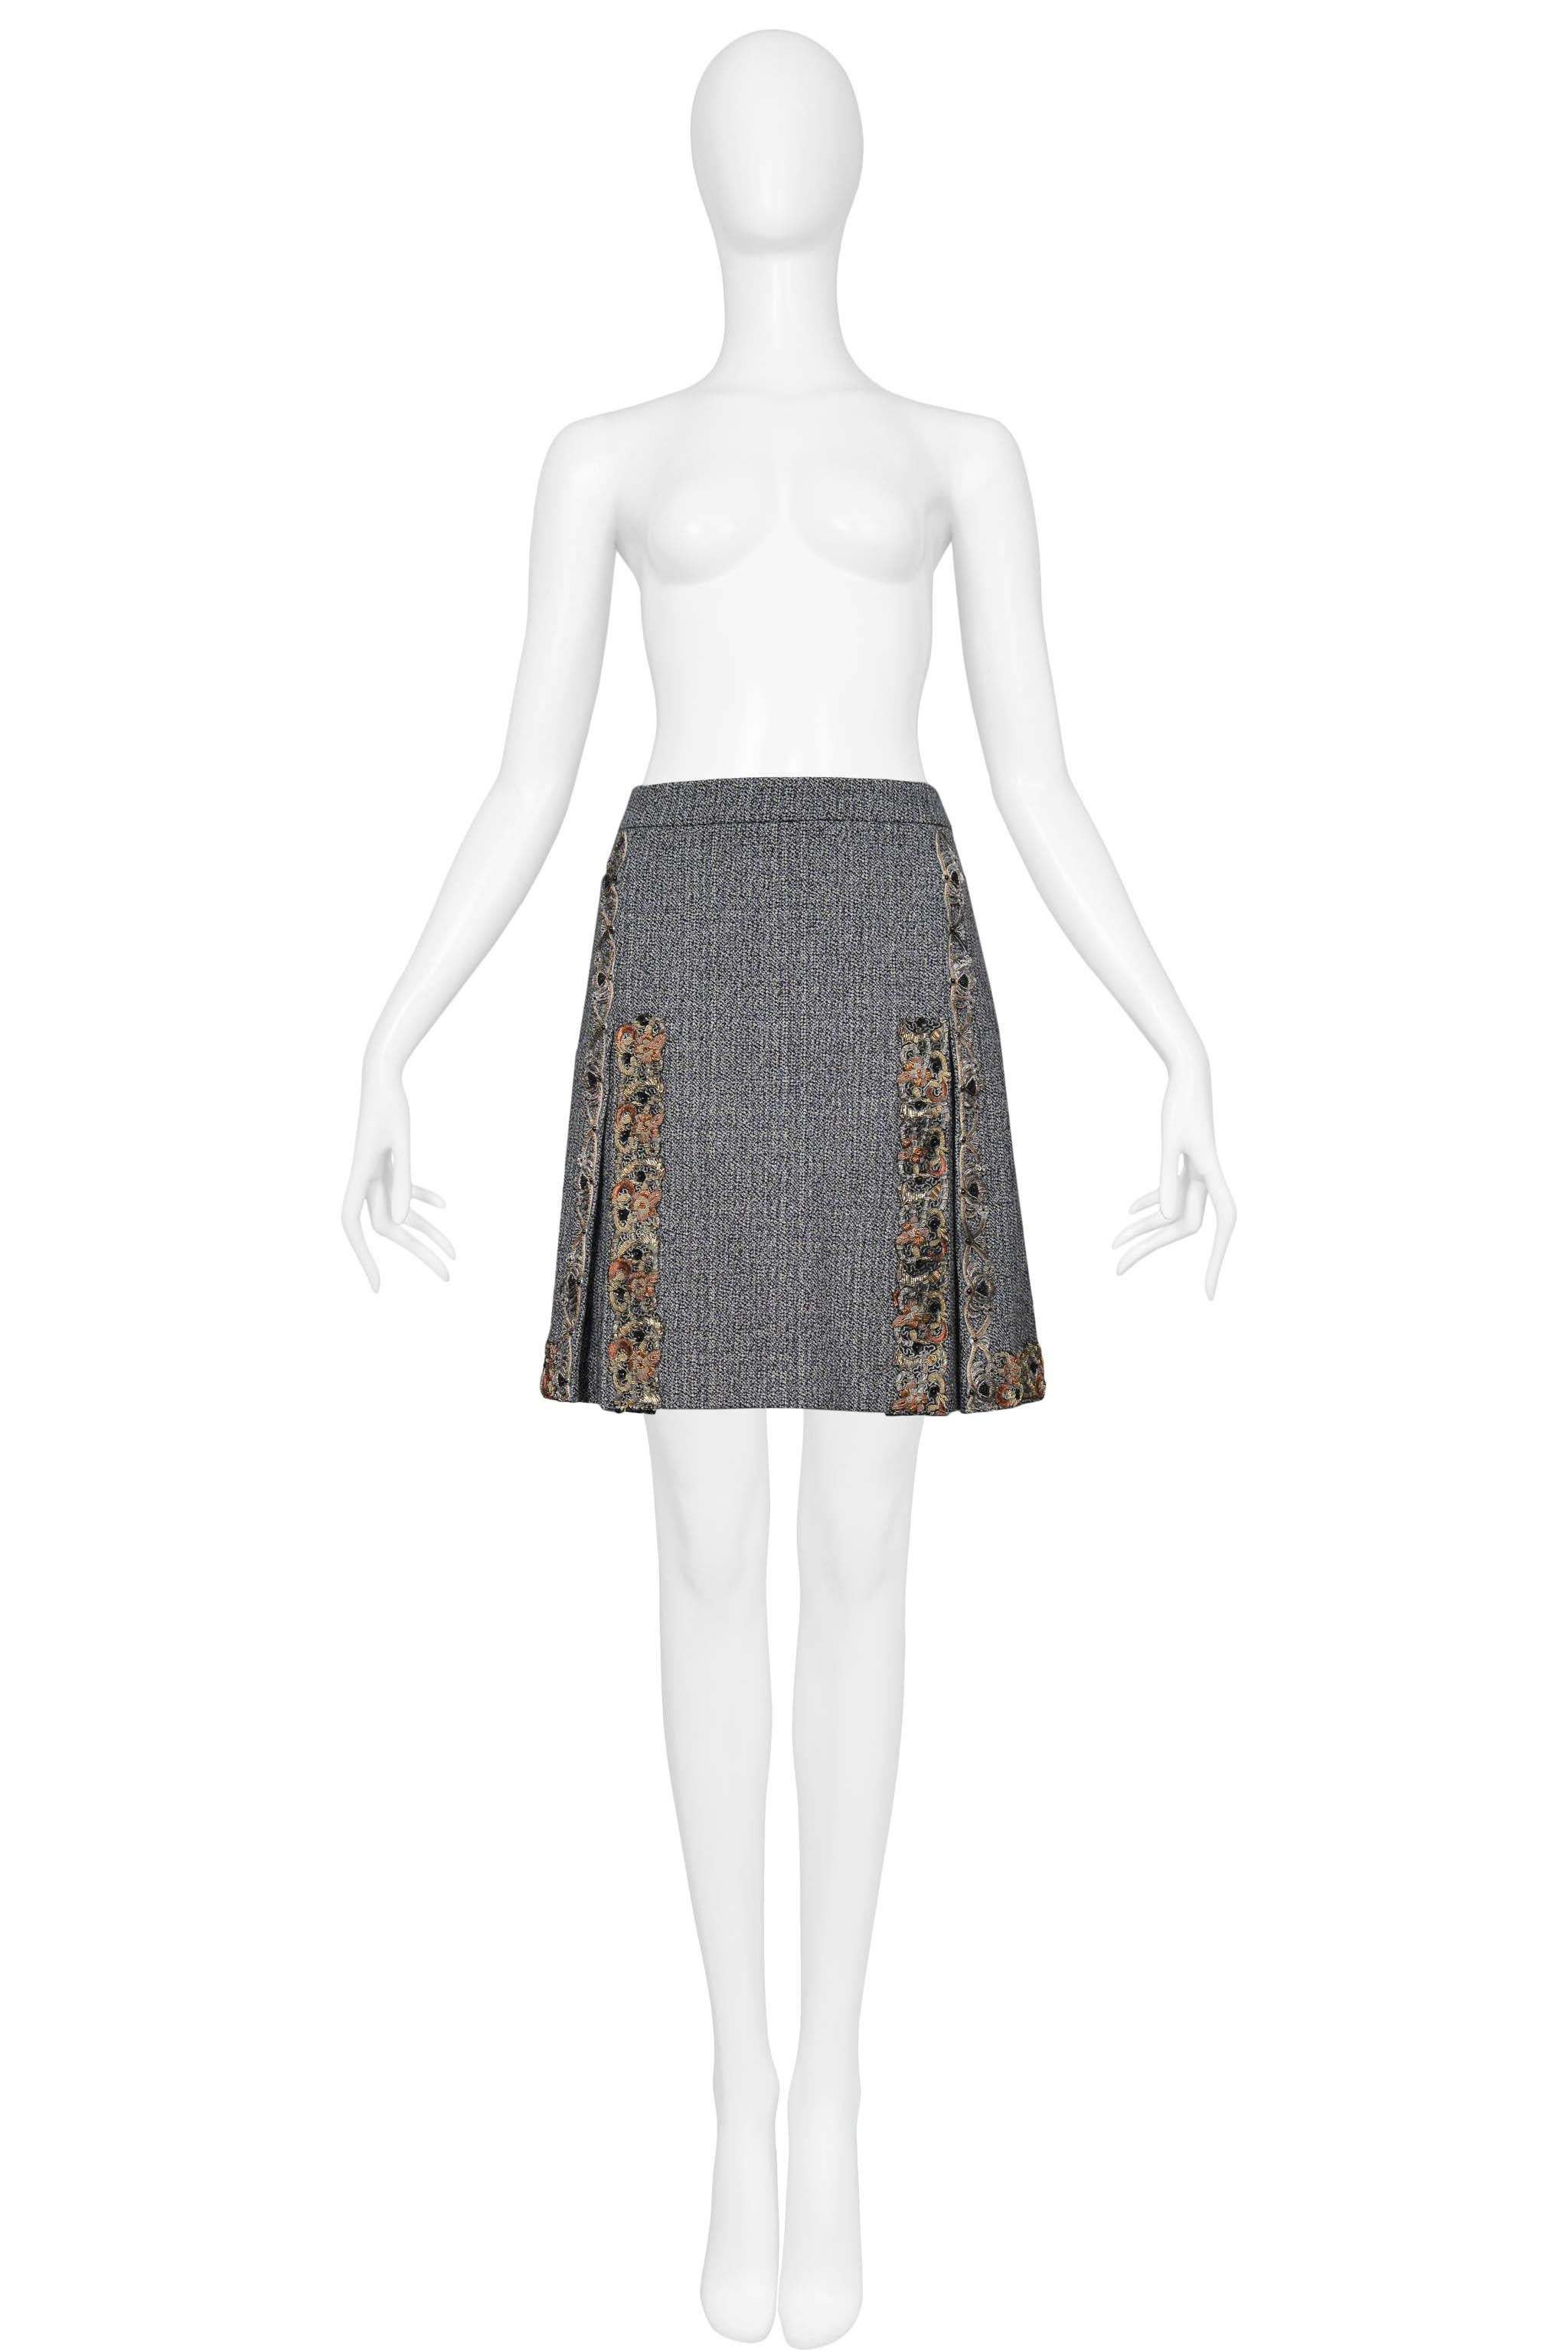 Resurrection Vintage is excited to offer a vintage Miu Miu grey tweed wool skirt featuring box pleats and decorative trim. 

Miu Miu
Size 44
Wool
2004 Collection 
Excellent Vintage Condition
Authenticity Guaranteed 